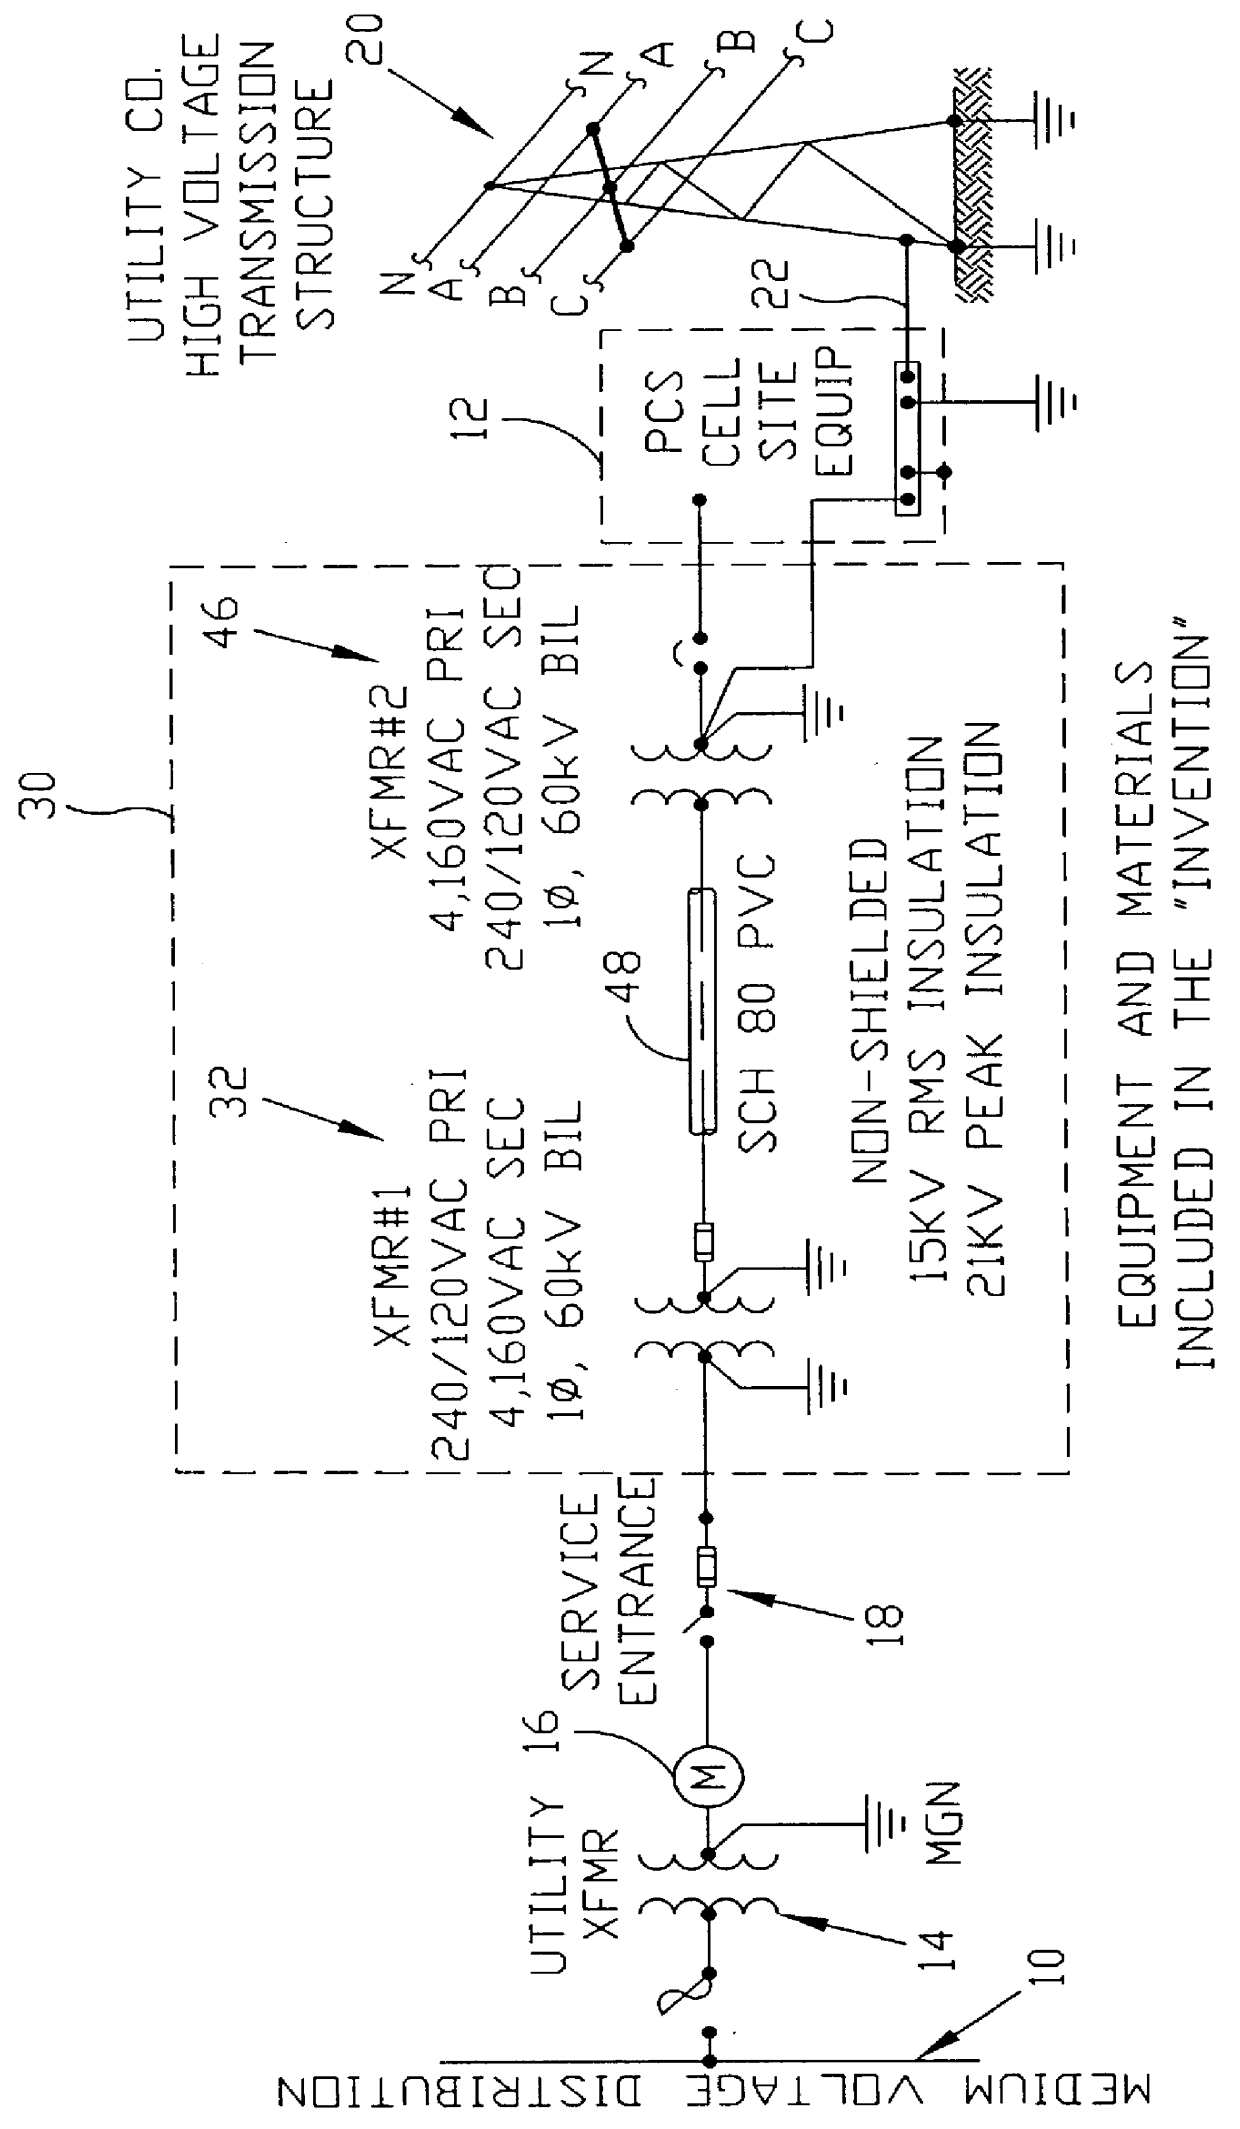 Multi-grounded neutral electrical isolation between utility secondary low-voltage power service and high-voltage transmission structures